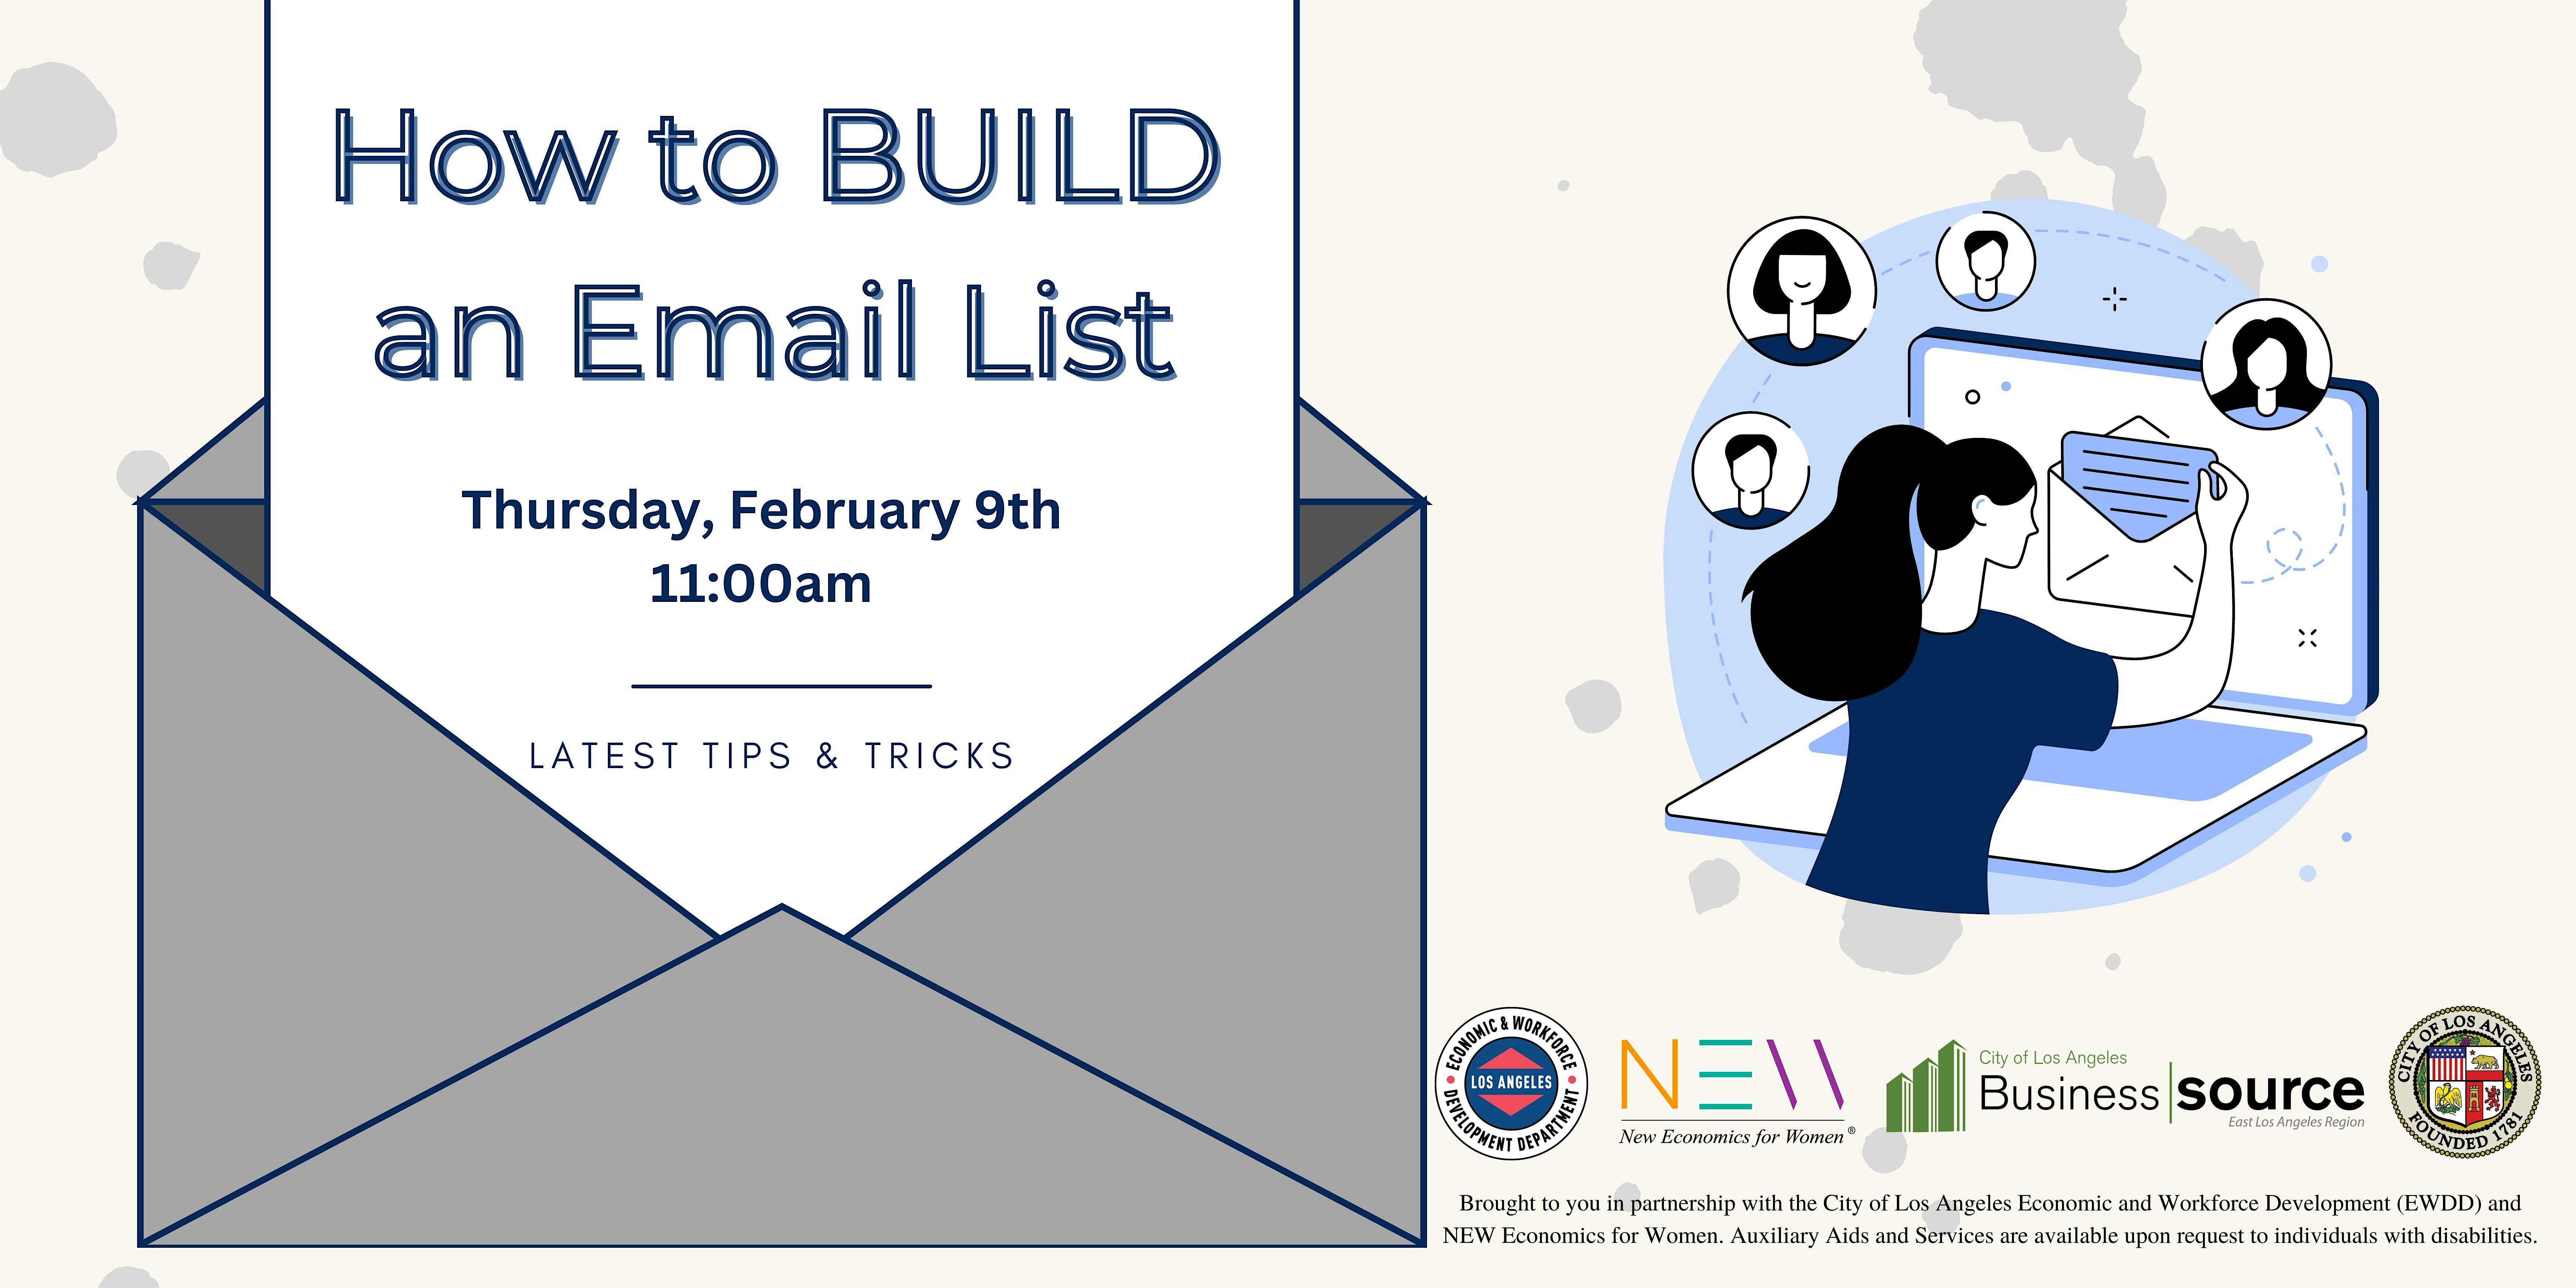 How to BUILD an Email List